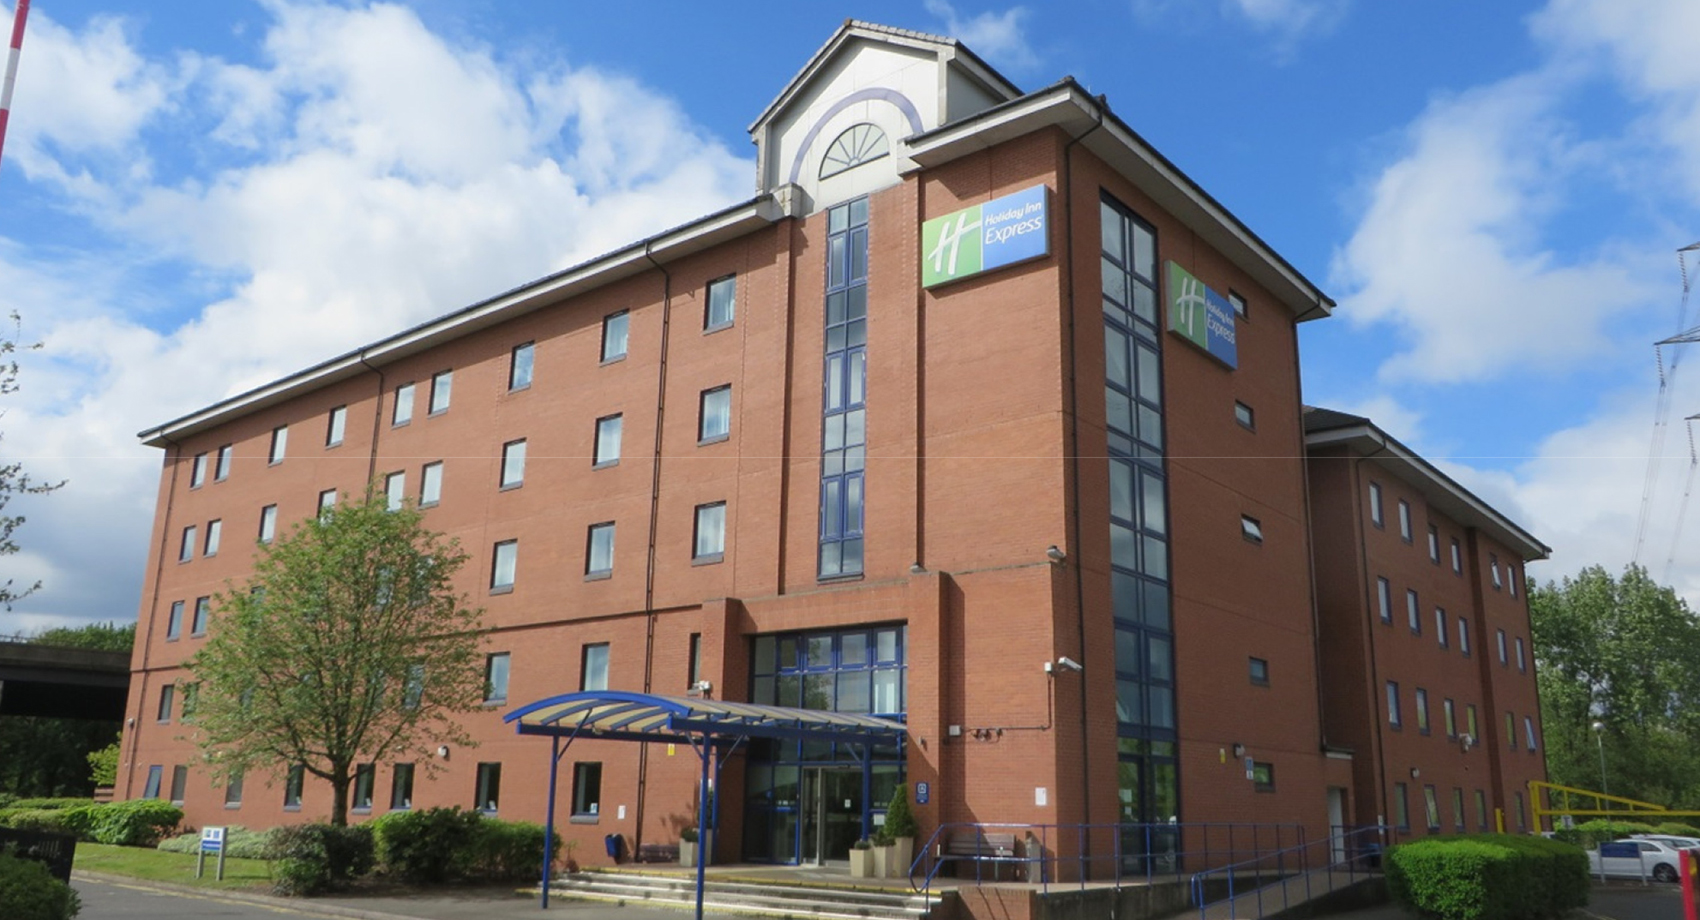 Holiday Inn Express Castle Bromwich